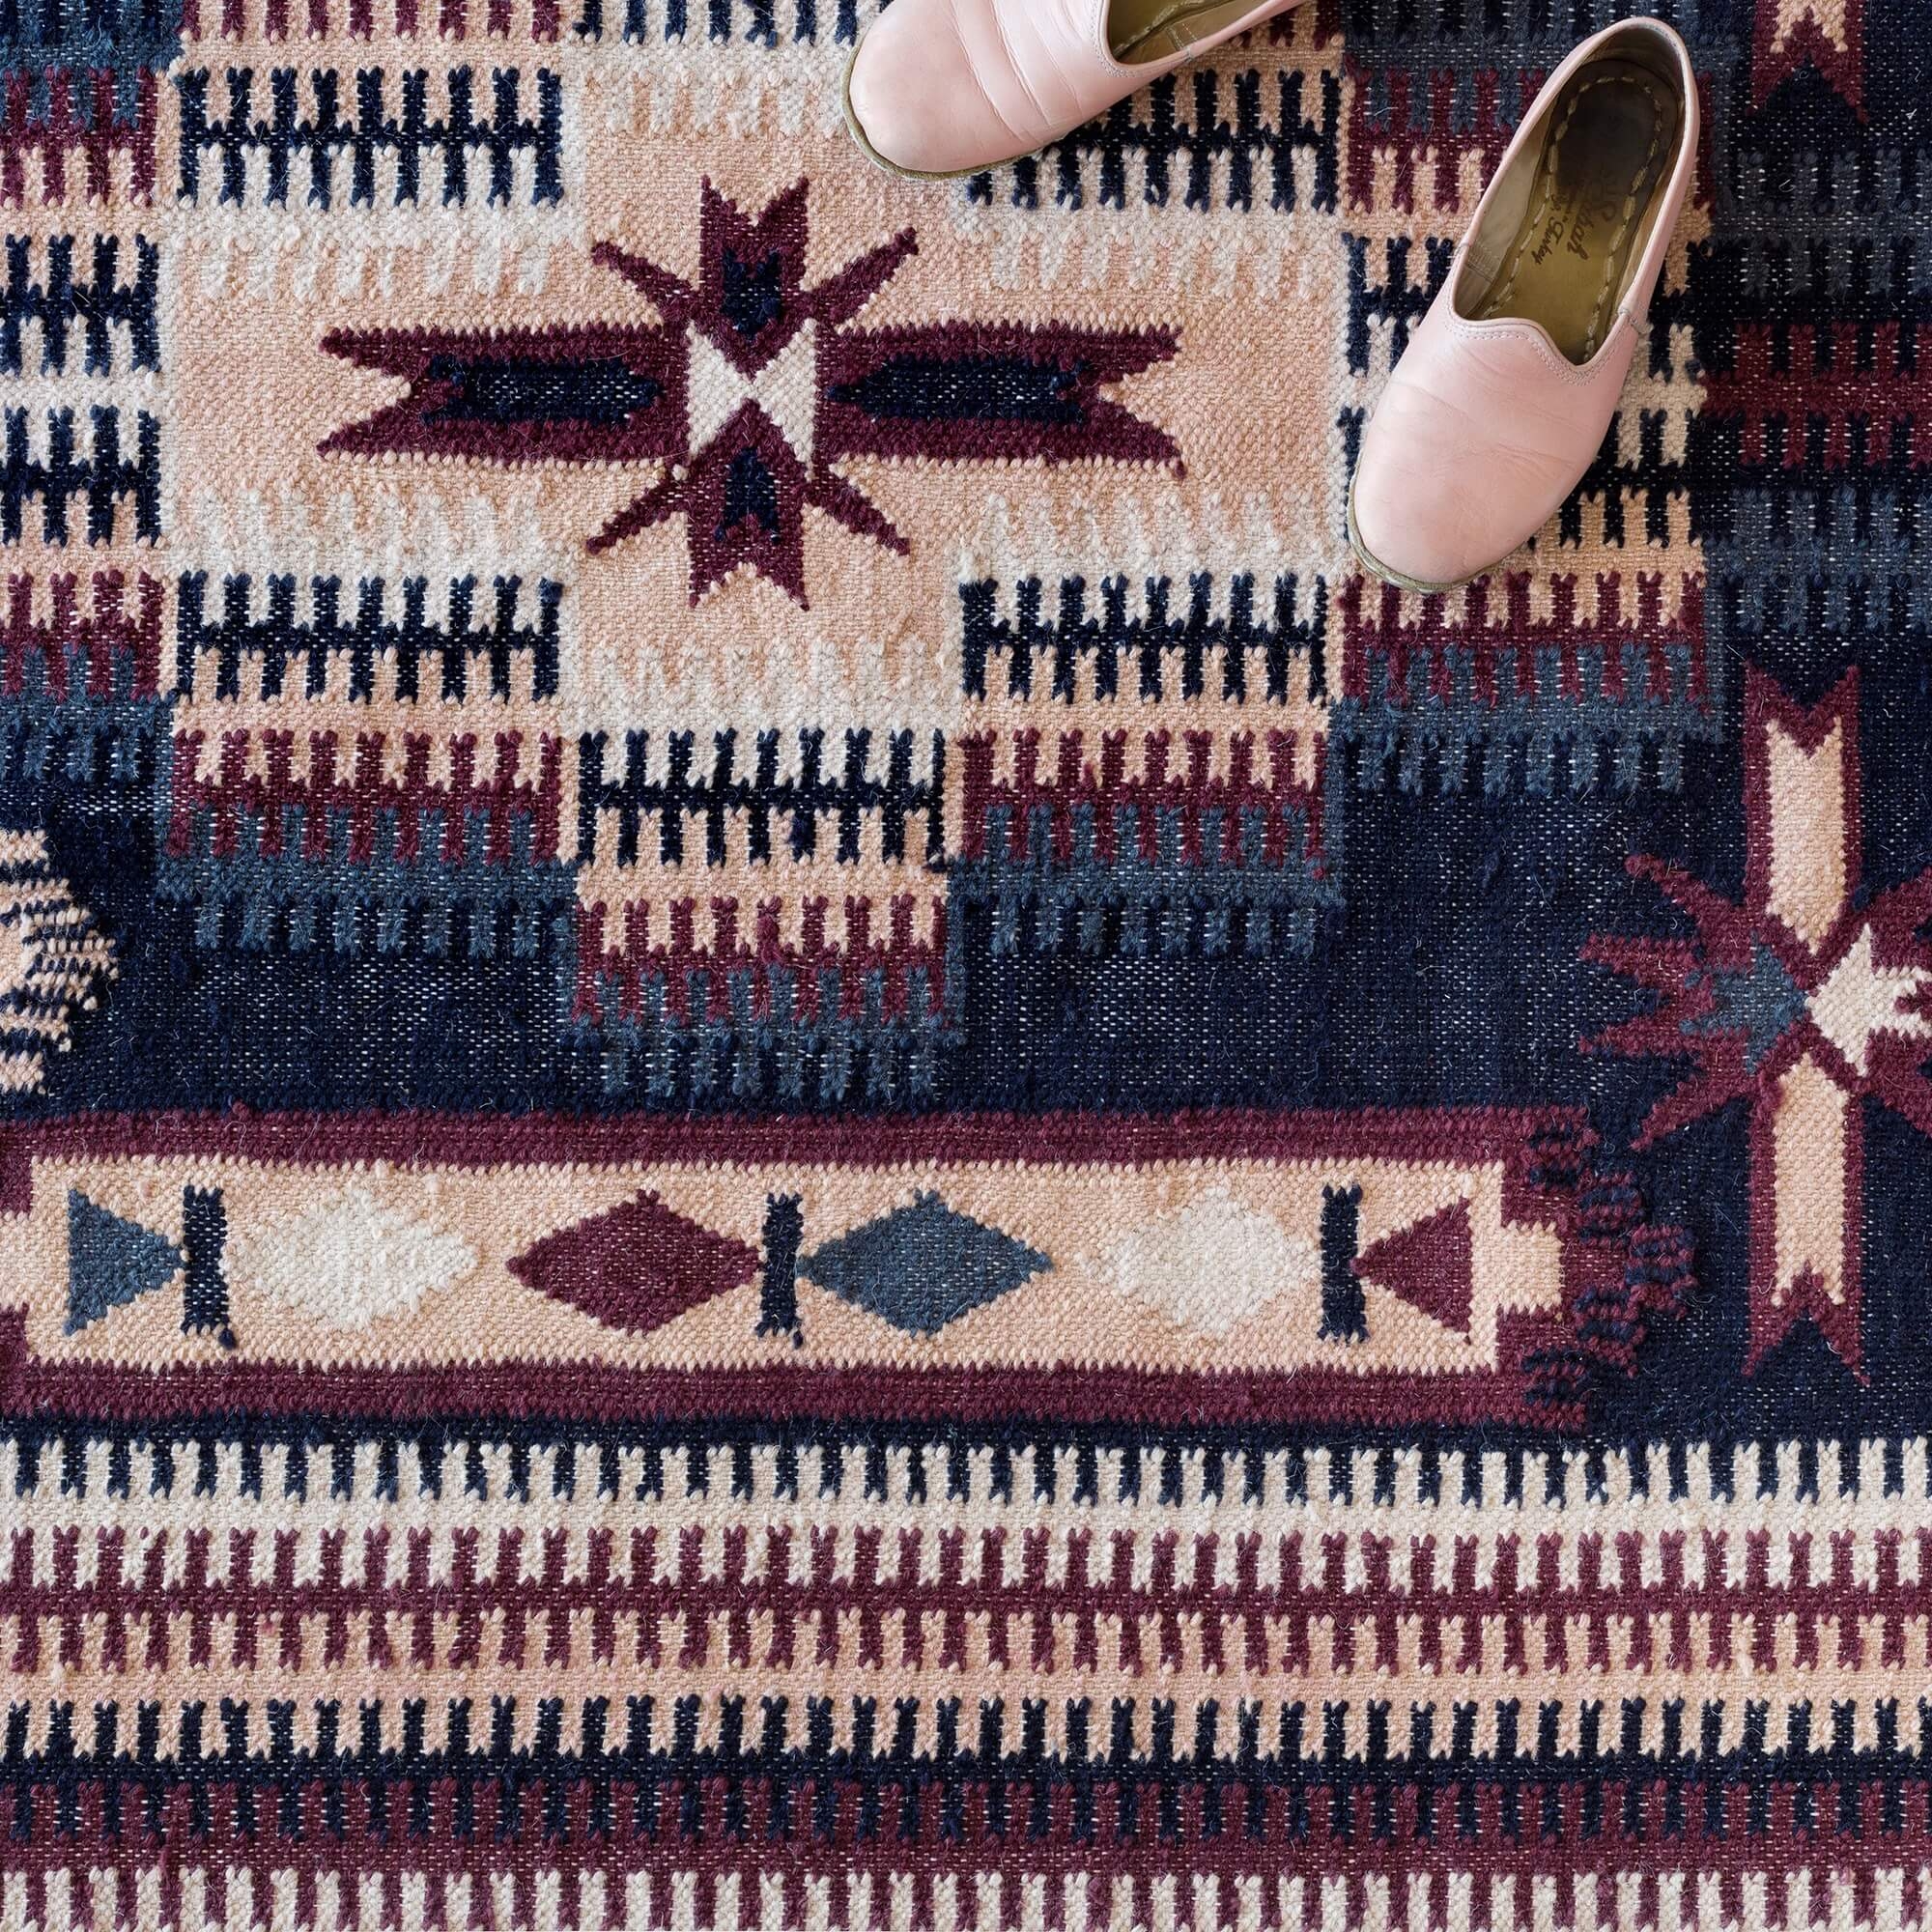 The Citizenry Keya Handwoven Area Rug | 10' x 14' | Made You Blush - Image 4